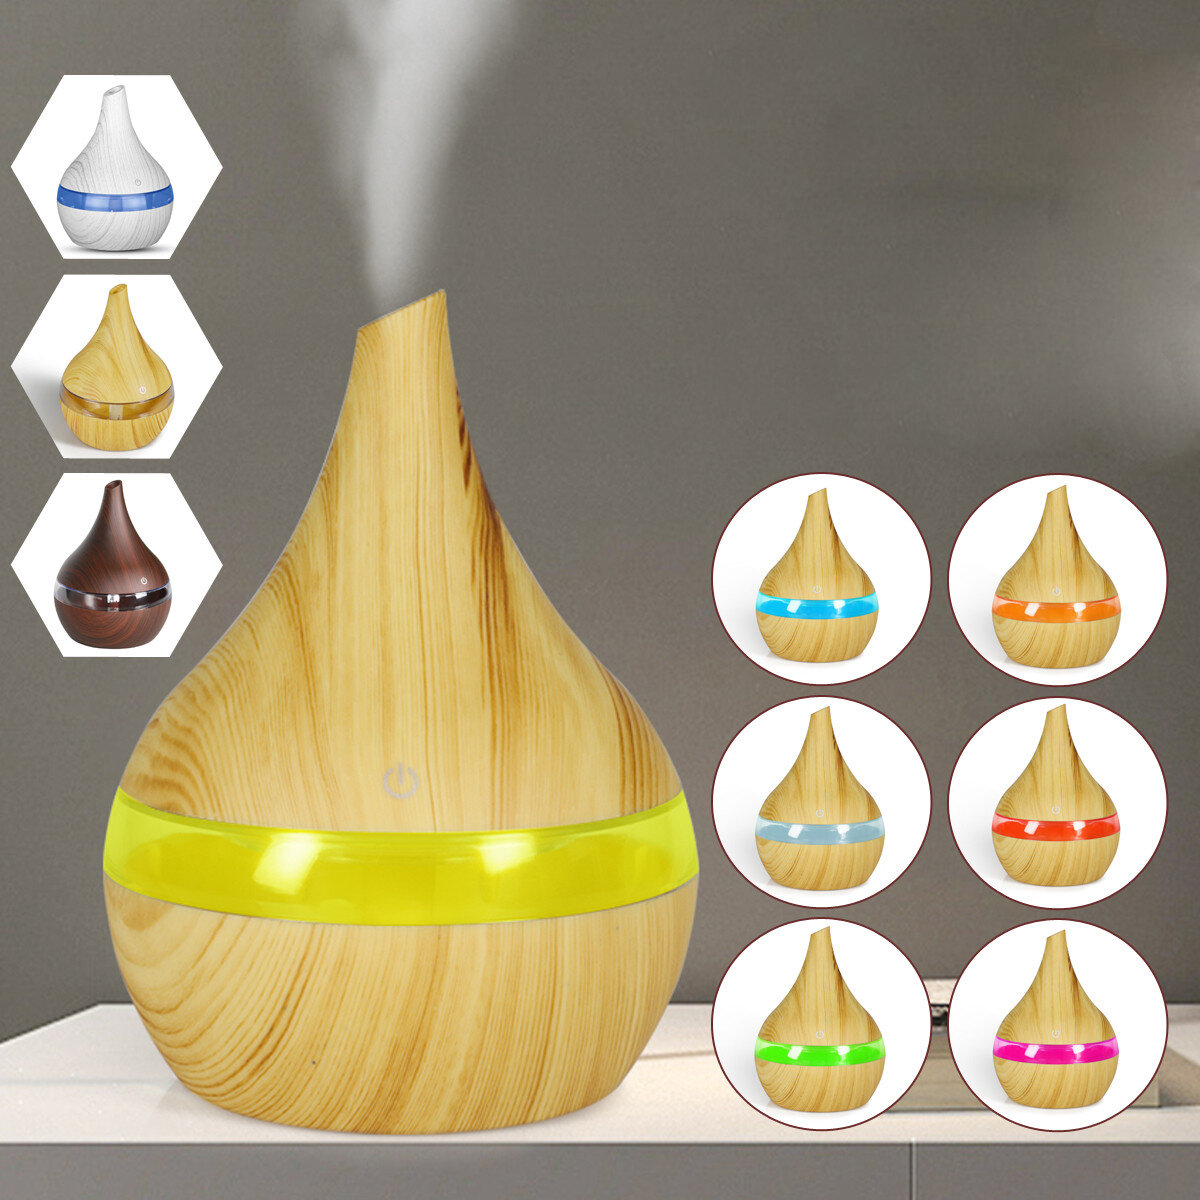 300ml Electric Ultrasonic Air Mist Humidifier Purifier Aroma Diffuser 7 Colors LED USB Charging for Home Car Office